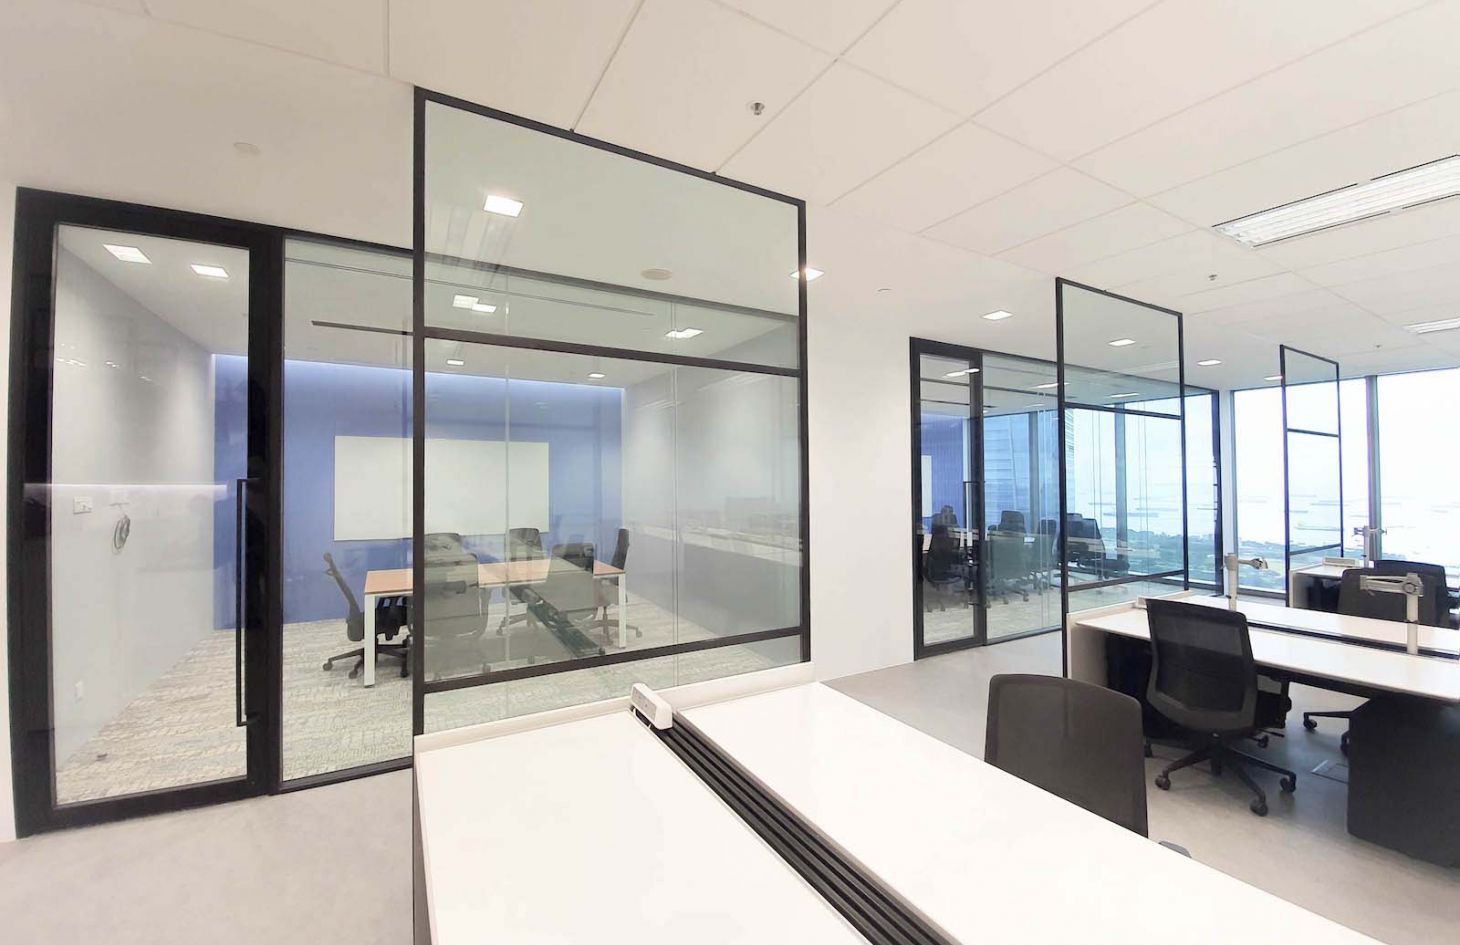 Single Glazed Acoustic Partition as Glass Divider